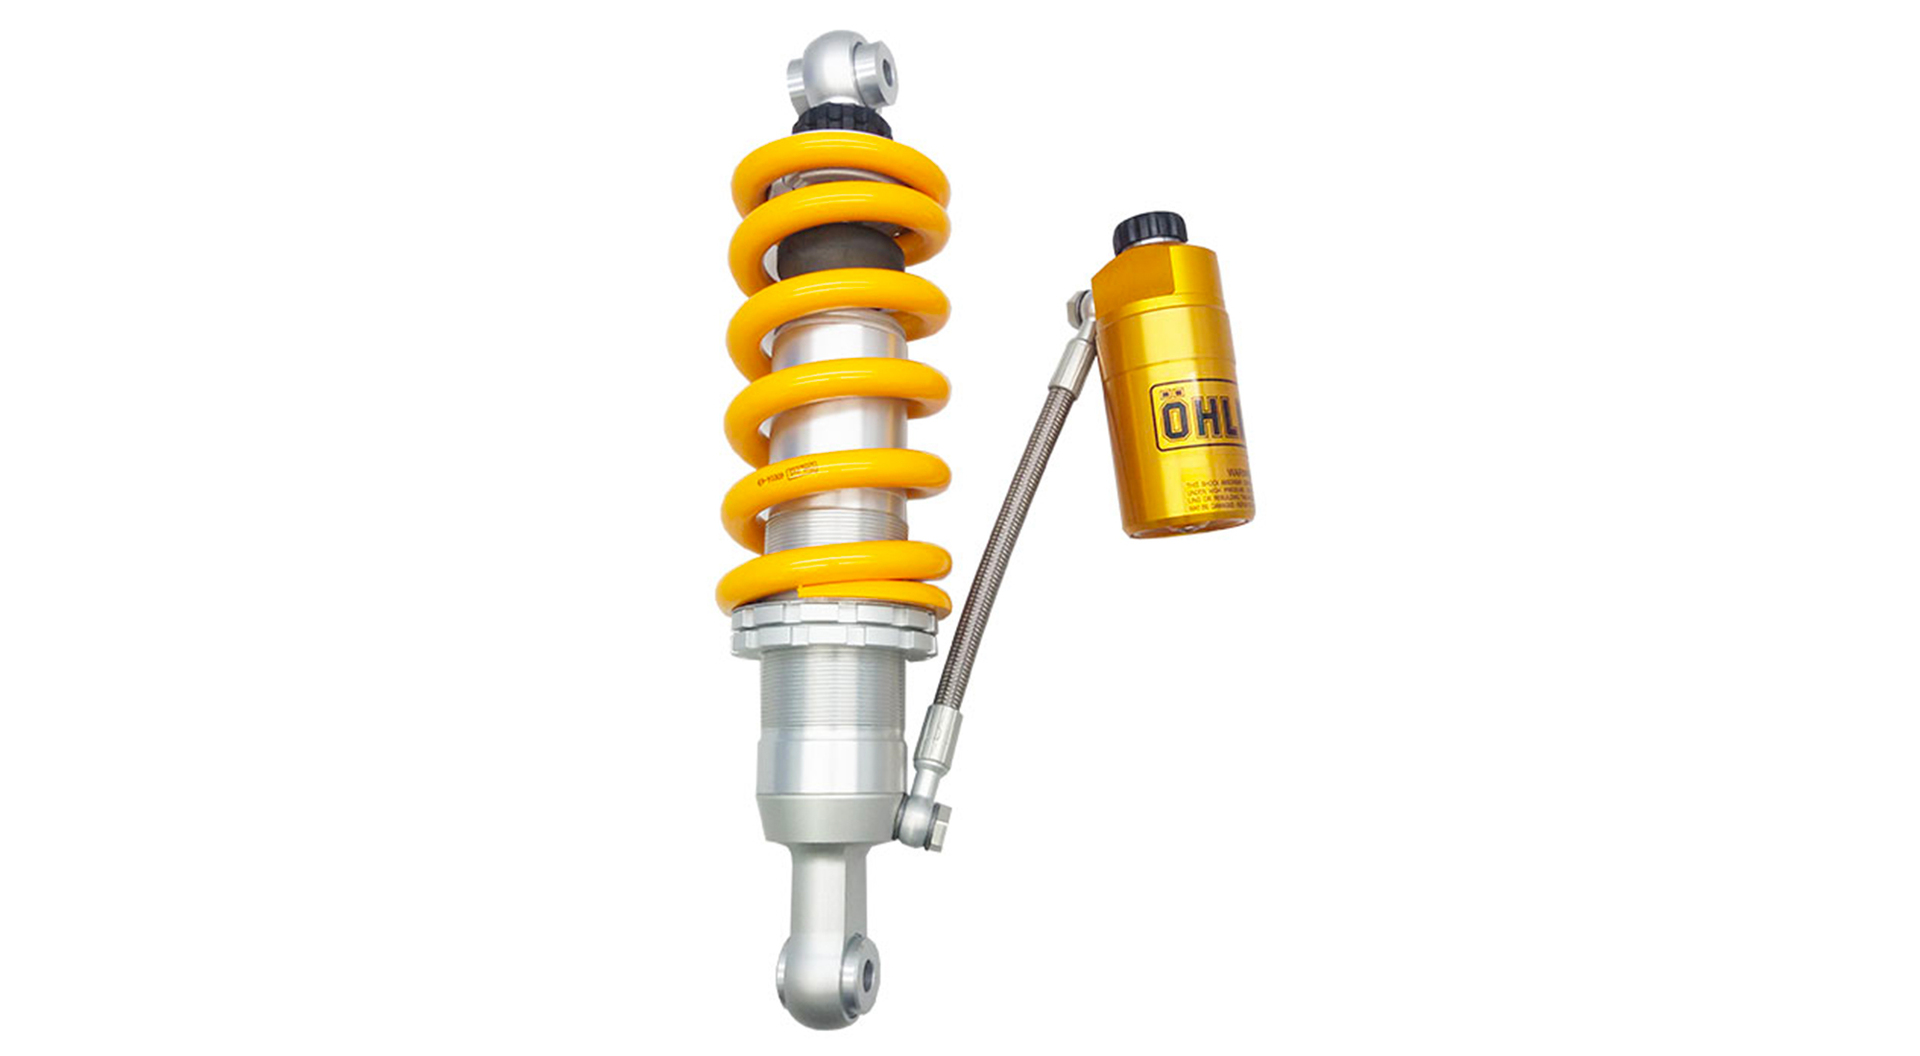 Öhlins suspension upgrades for Honda's CB650R maximise chassis